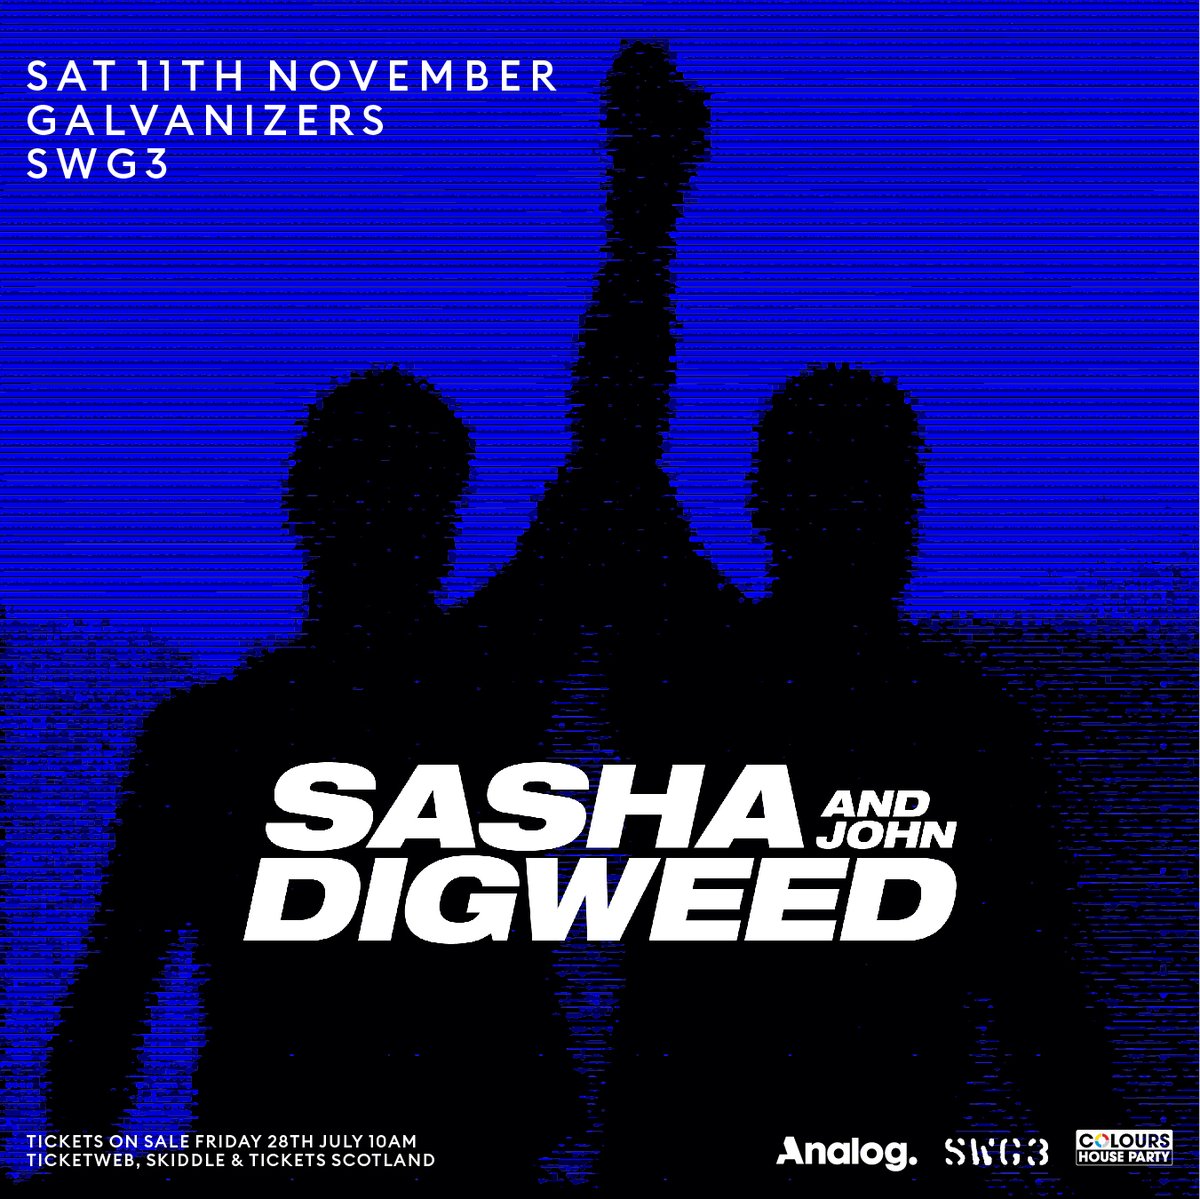 11th of Nov, Galvanizers @SWG3glasgow Catch @sashaofficial & myself Pre sale tkts on sale THURS General release on sale FRIDAY Last chance pre-sale sign up sashajohndigweed.co.uk All subscribers will receive an email at 10am on Thurs, remember and check your junk folder.